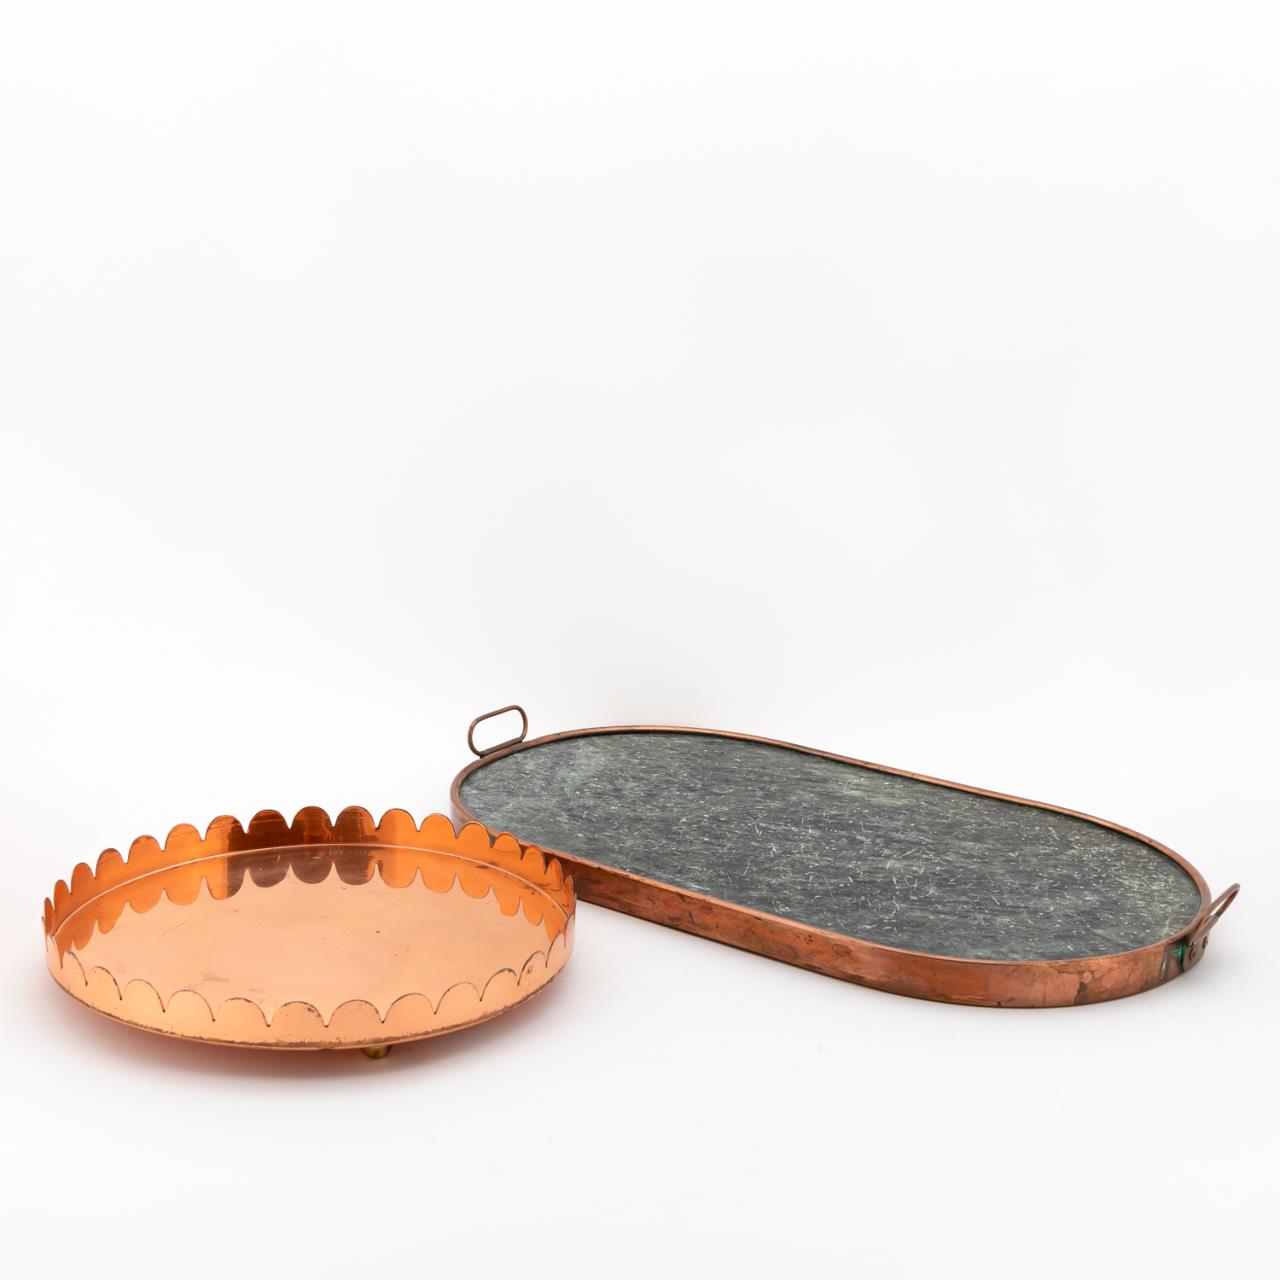 2 PCS, COPPER & MARBLE CHEESEBOARD